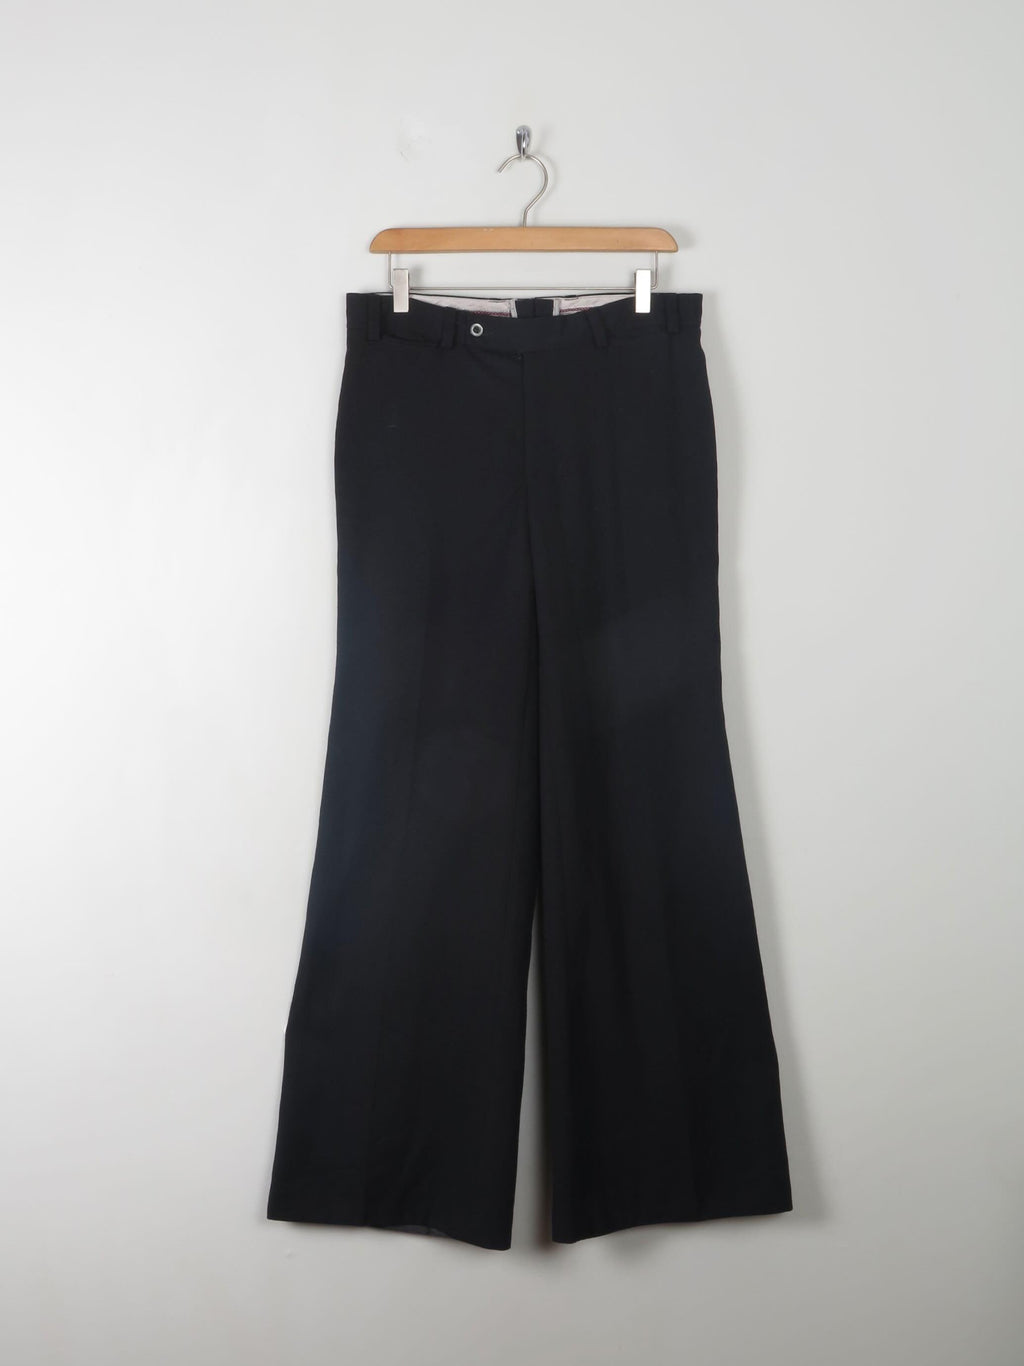 Vintage Black Flared Trousers 31"W 31L - The Harlequin